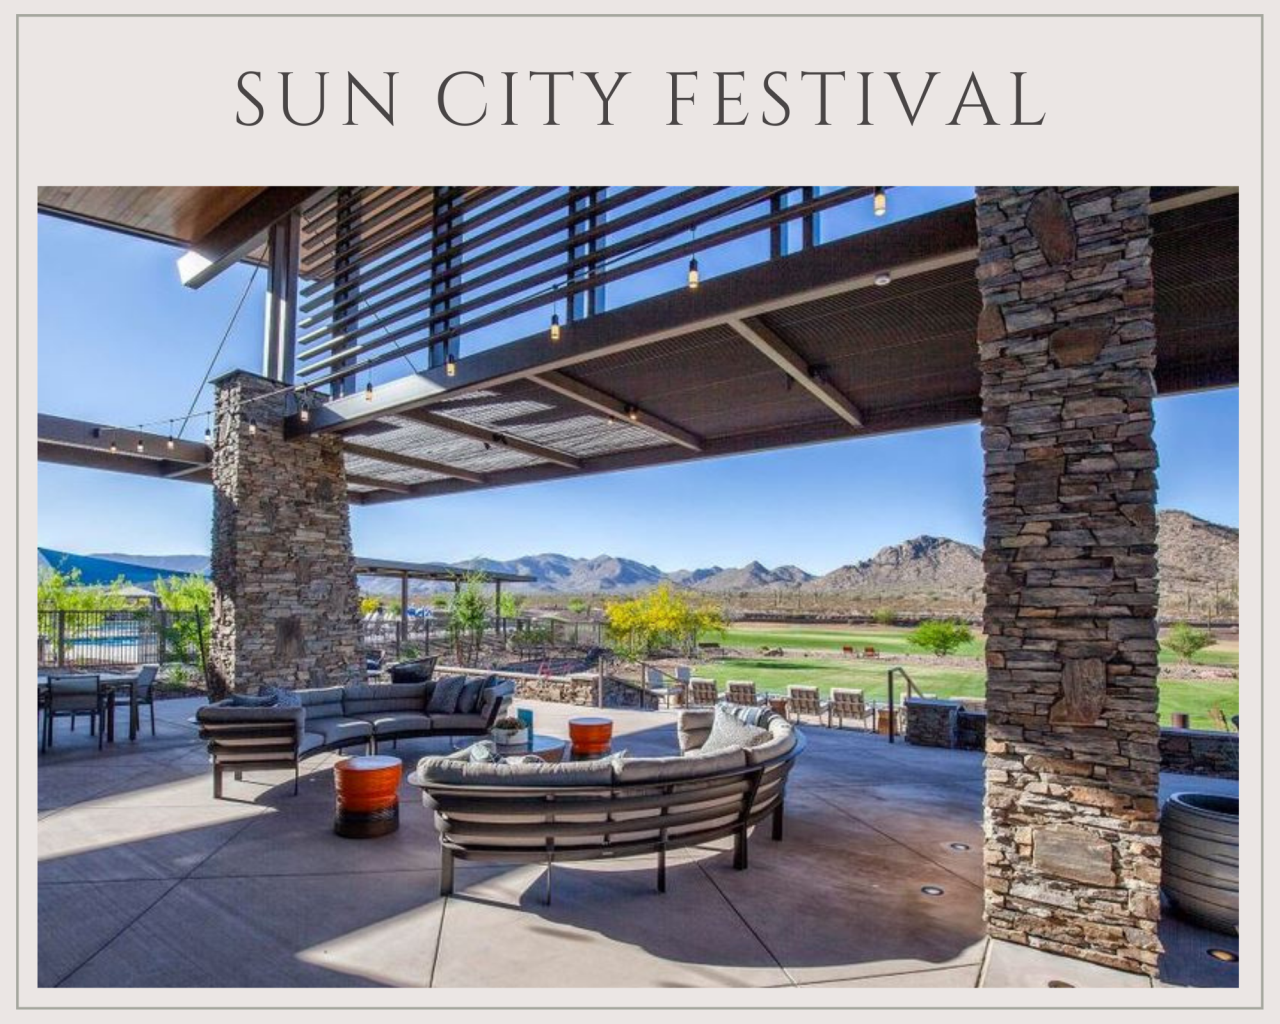 Sun City Festival Arizona resales real estate and homes for sale MLS listings